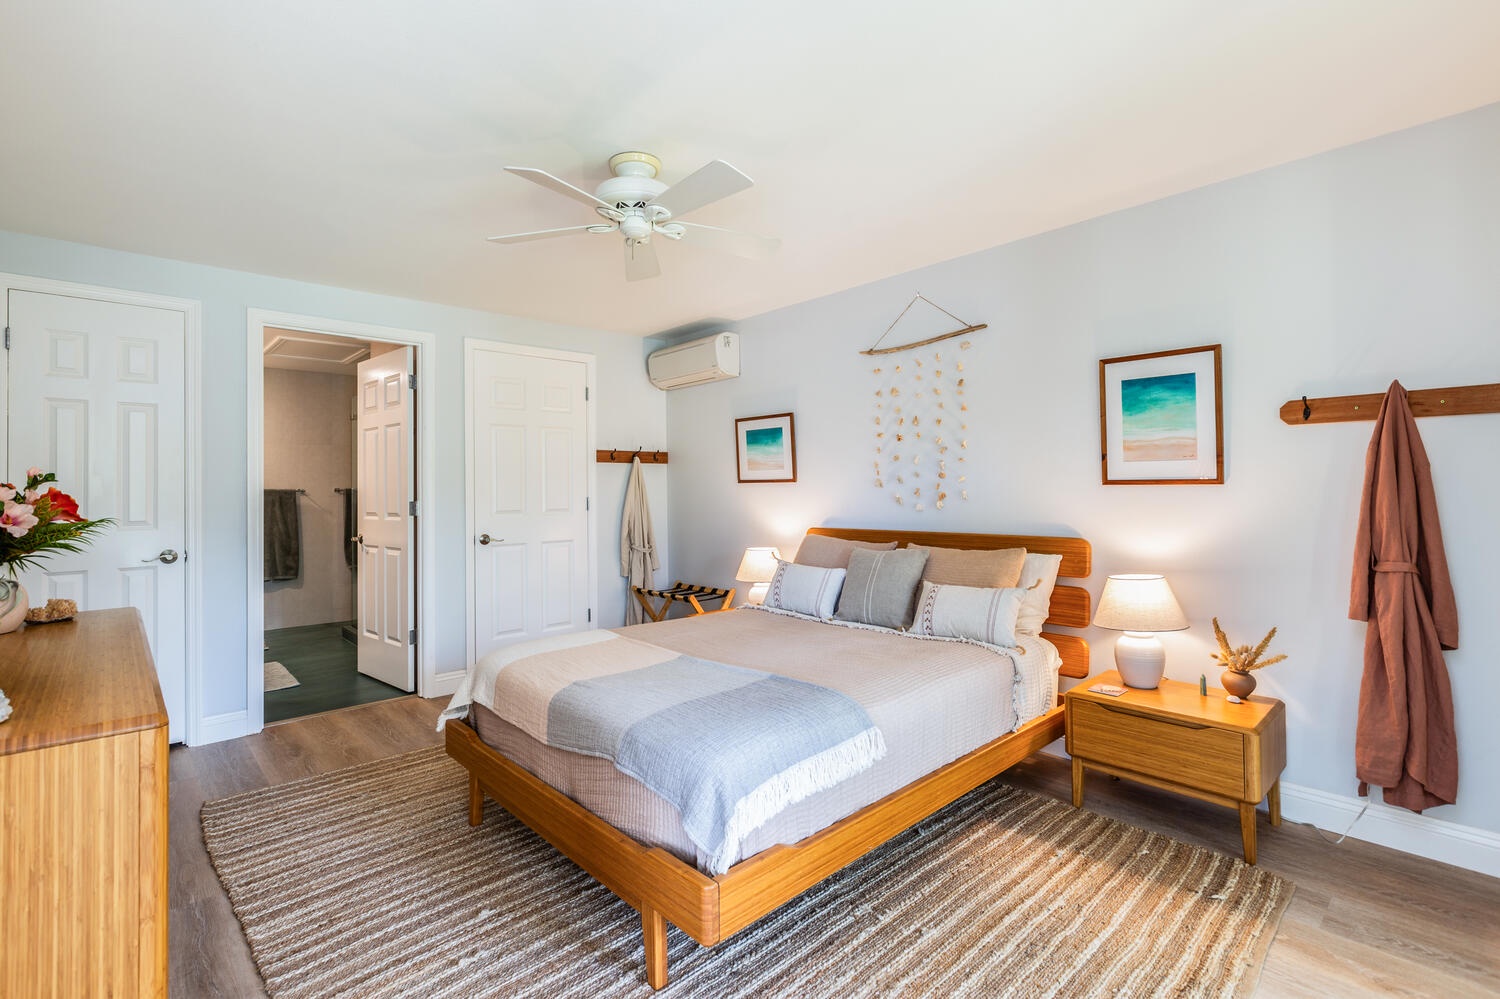 Princeville Vacation Rentals, Sea Glass - The second primary guest suite is in the main level with a queen bed.